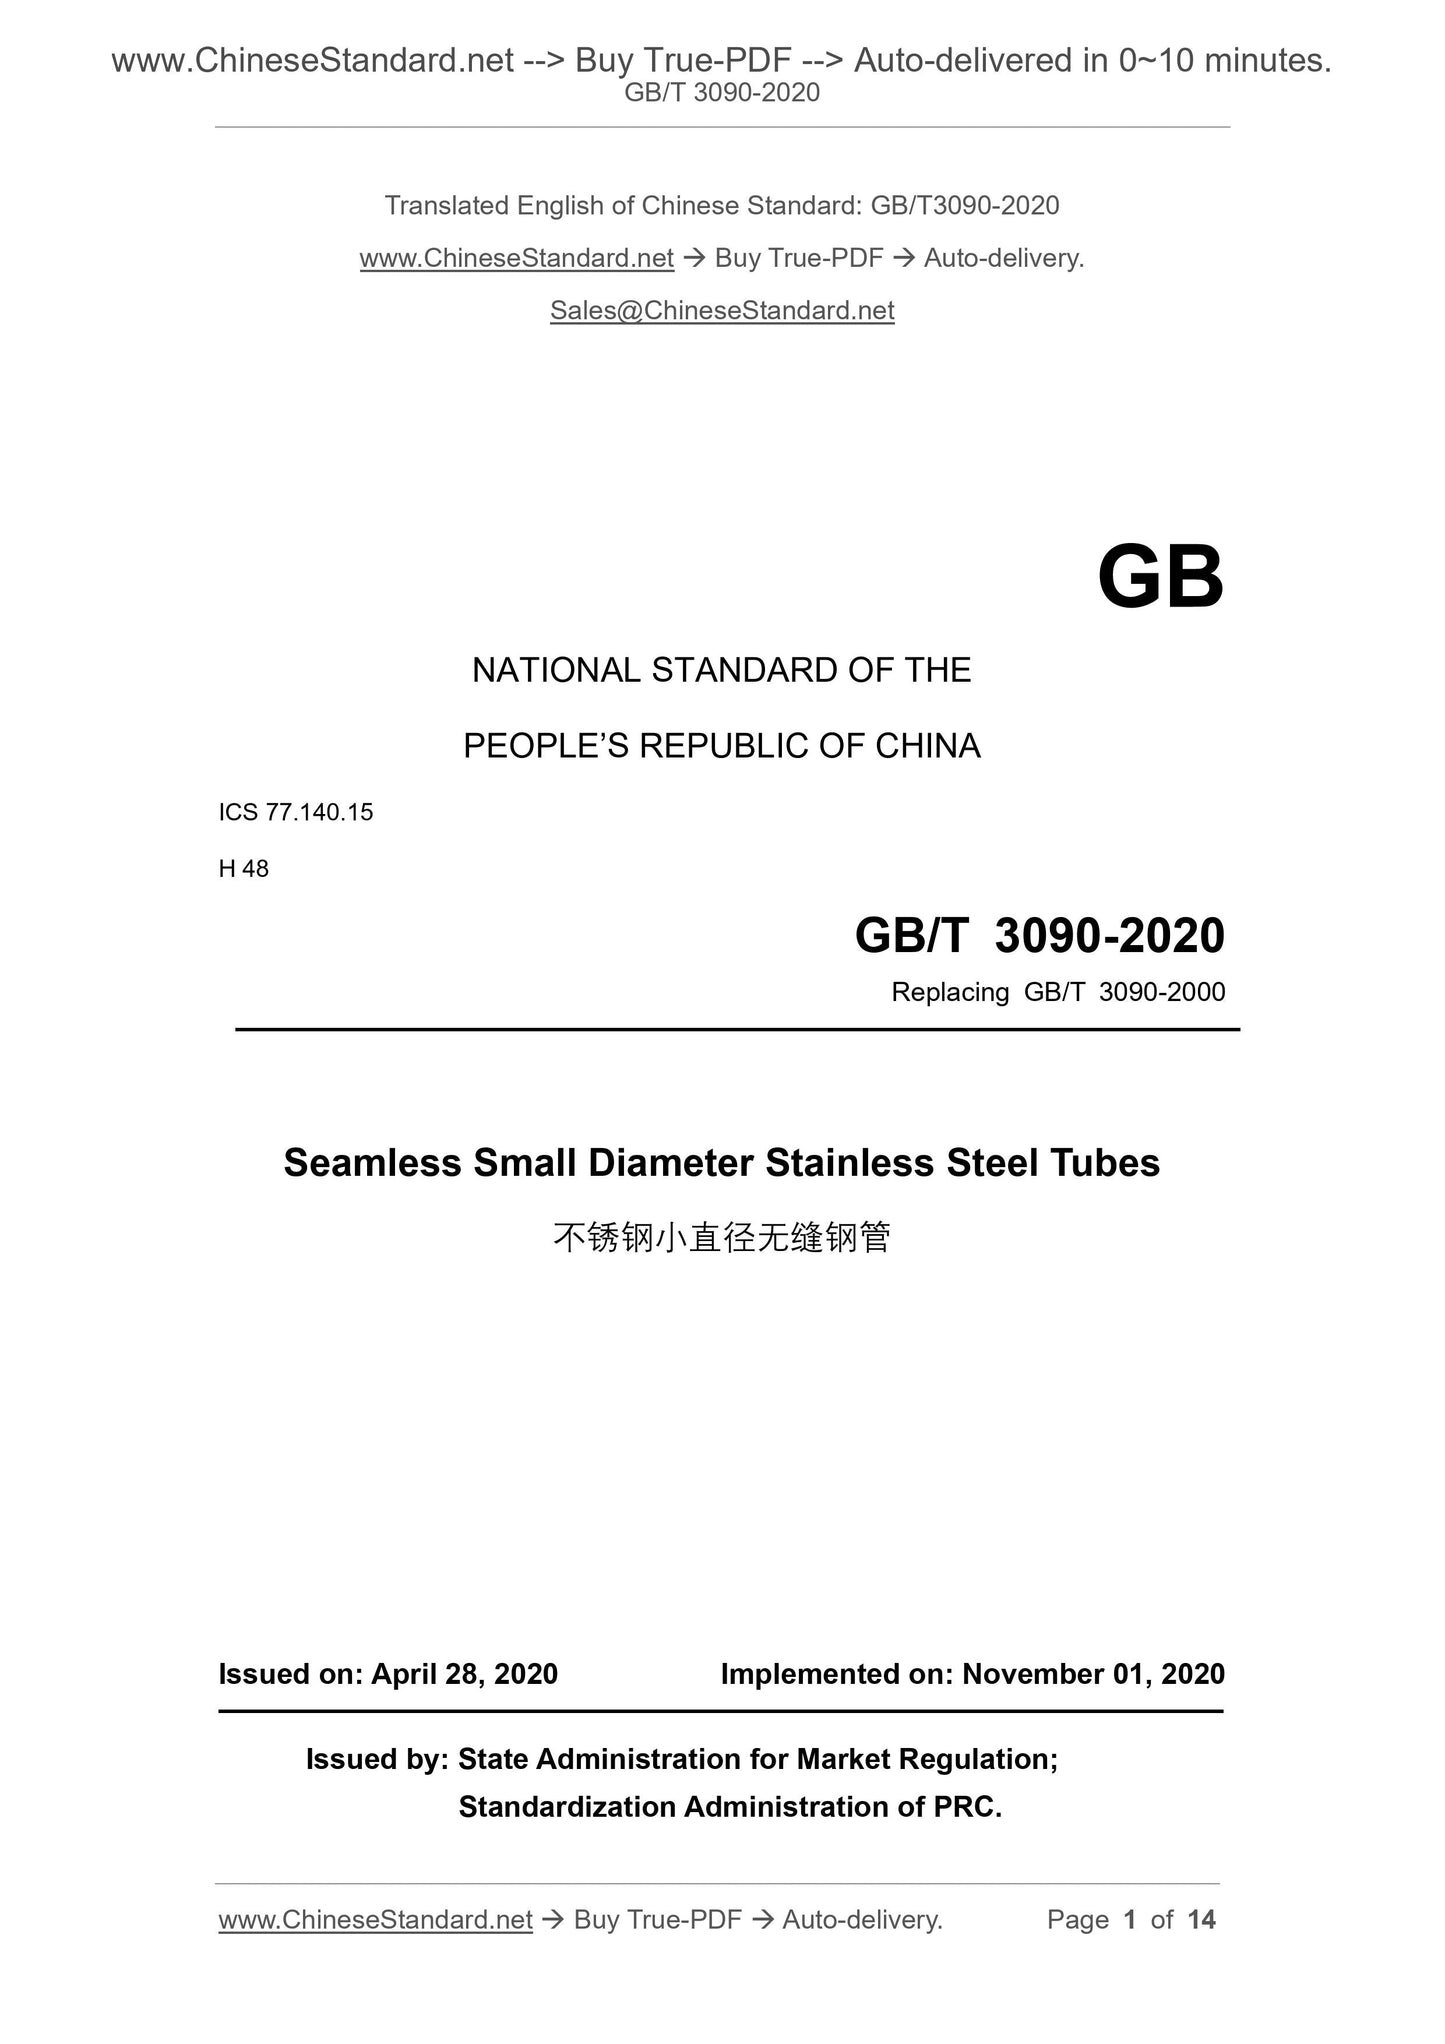 GB/T 3090-2020 Page 1